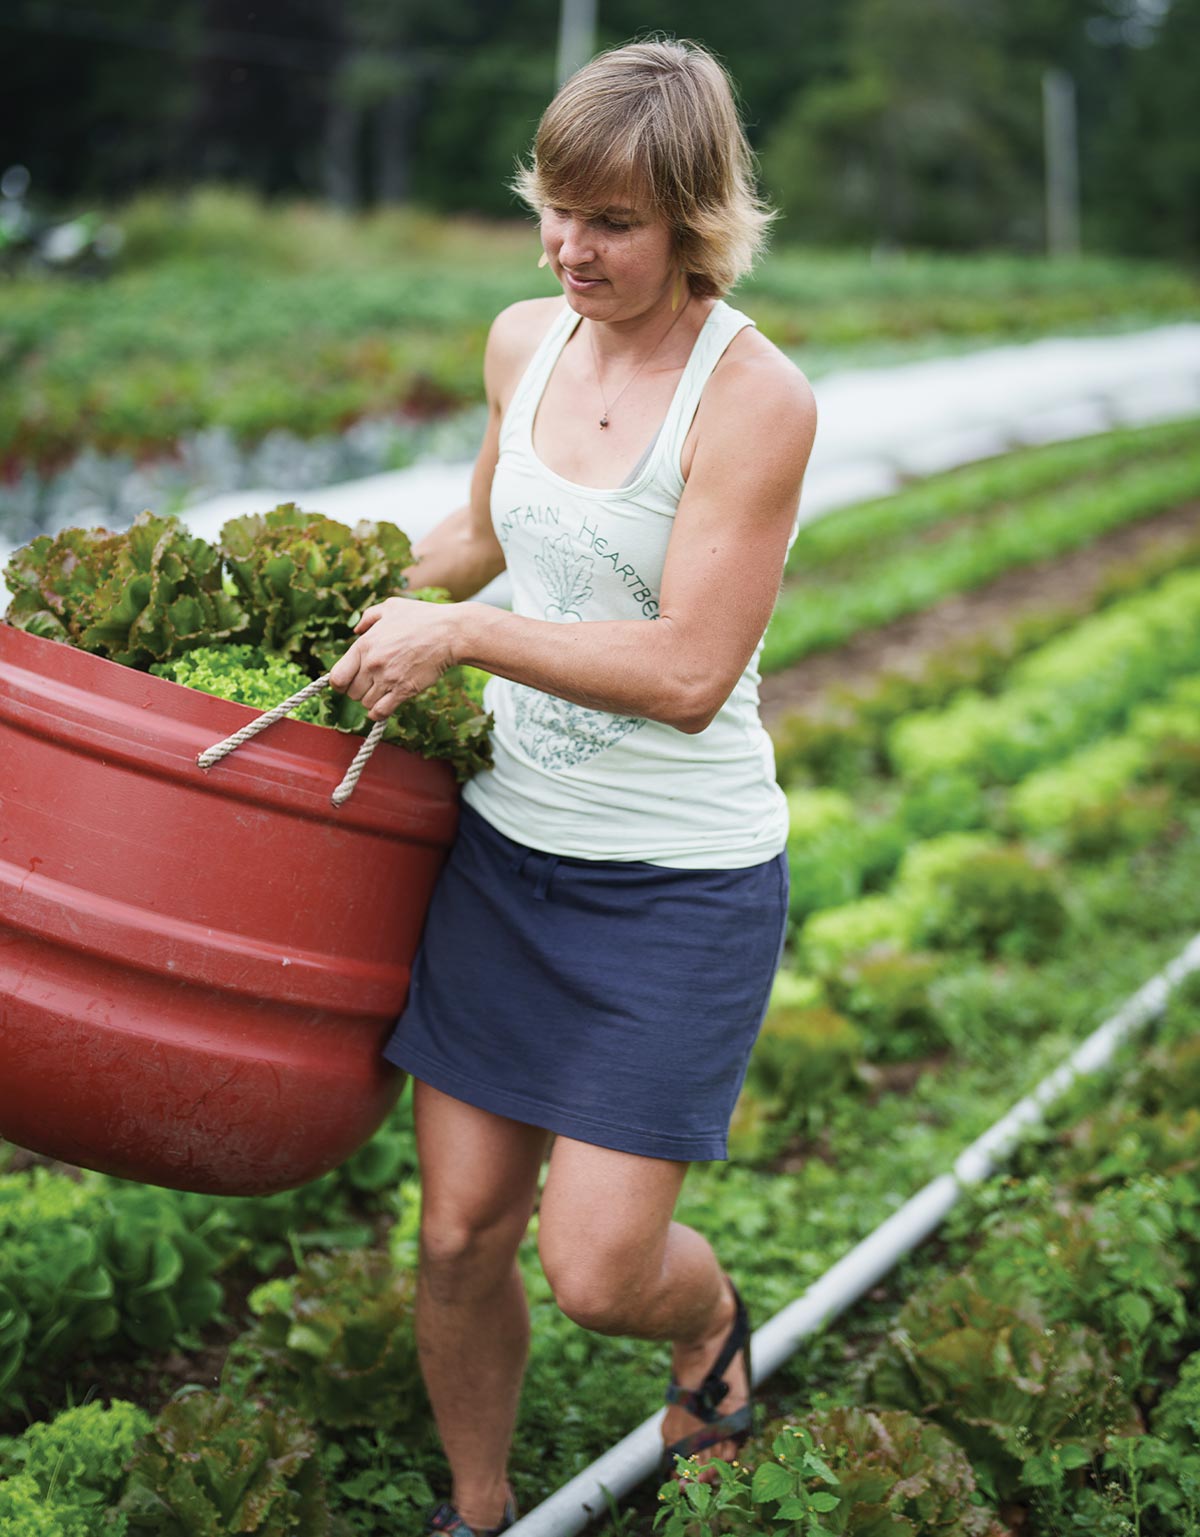 Joanne Ducas carries a large red bucket of leafy greens while walking down a crop row